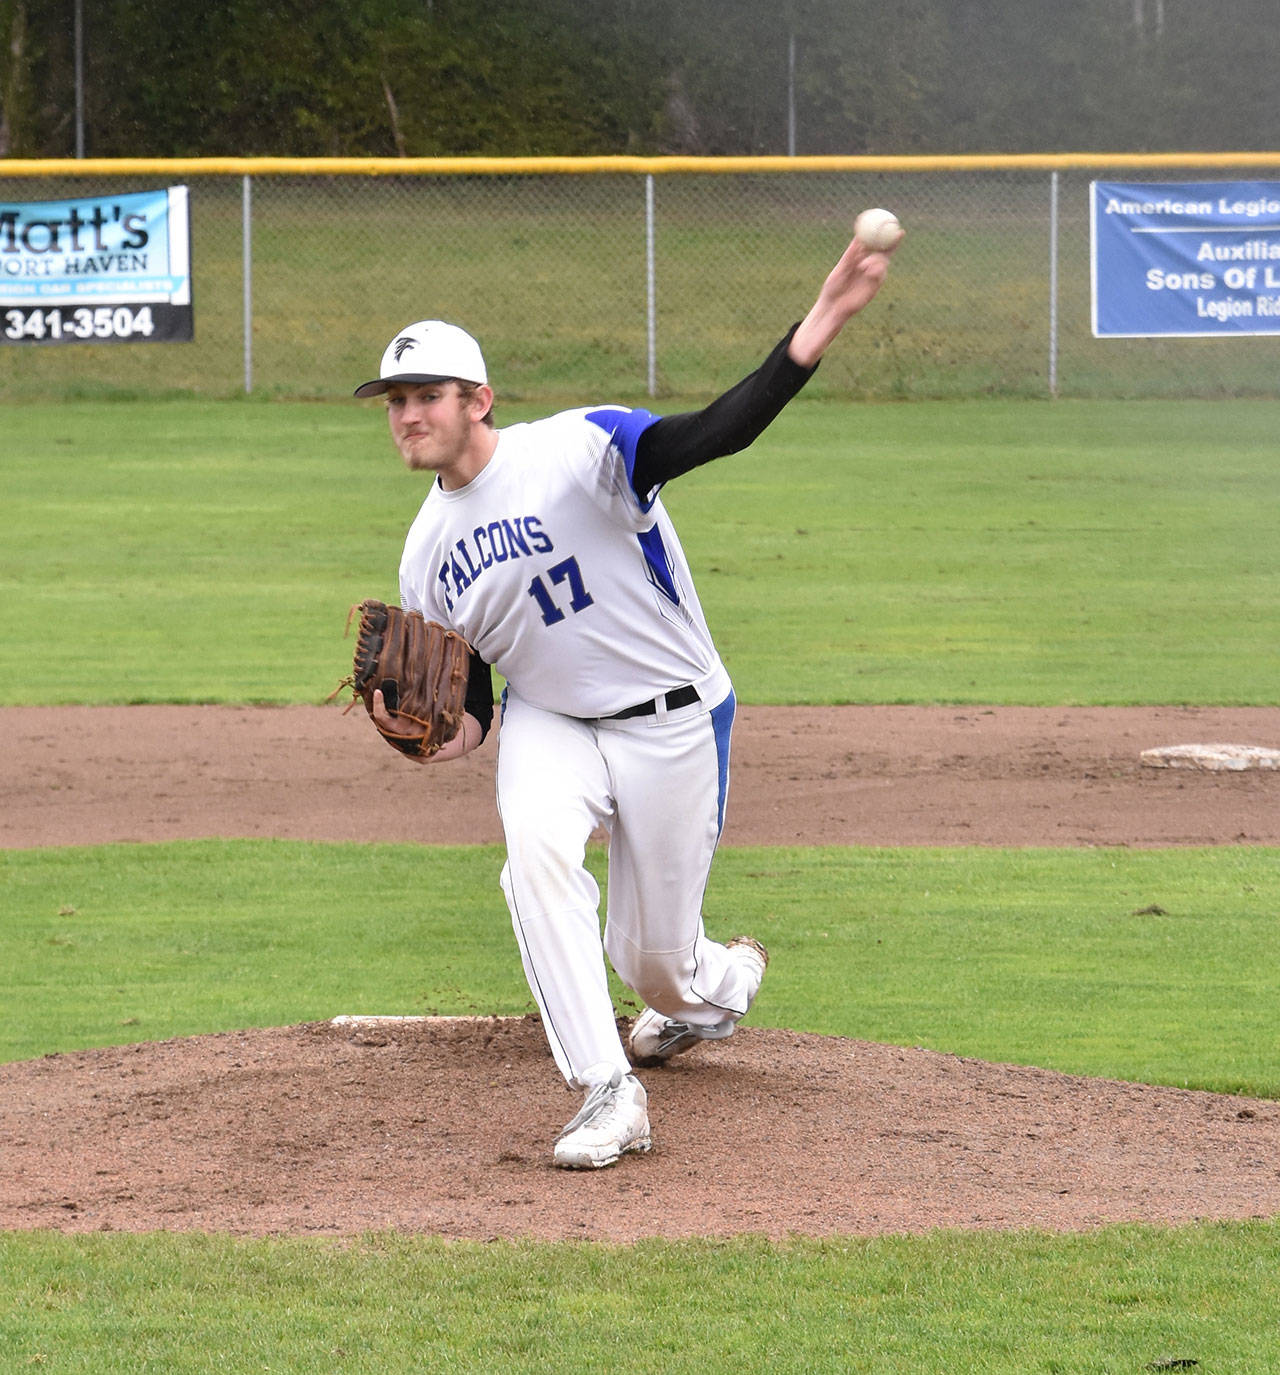 South Whidbey’s Brent Batchelor fires a pitch on the way to earning the win over Coupeville Wednesday. (Photo by Karen Carlson)